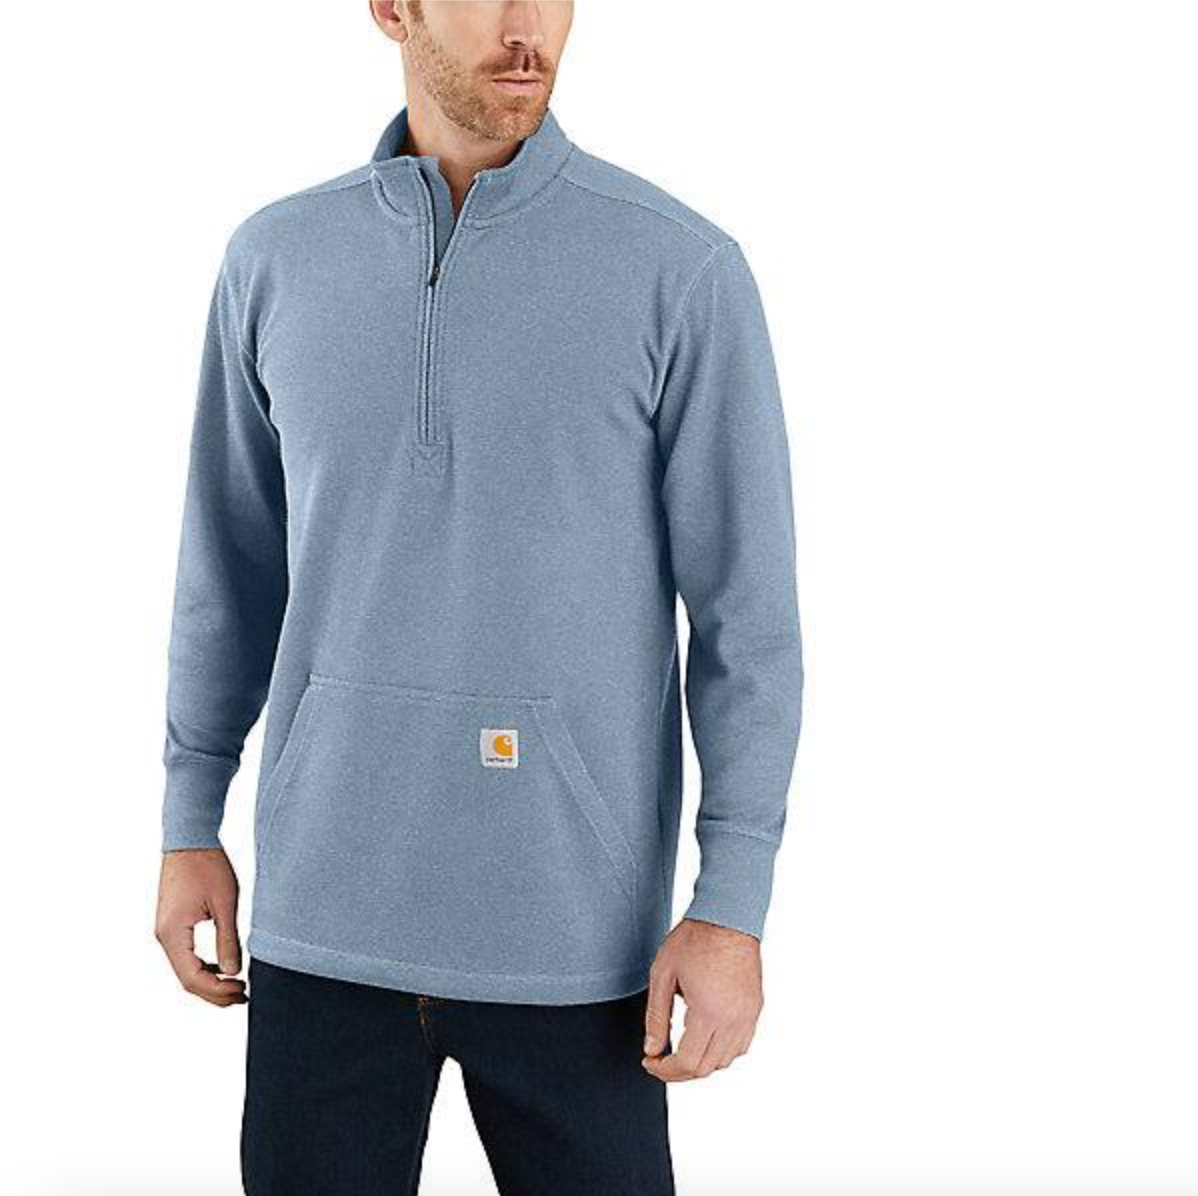 Carhartt Relaxed Fit Thermal Shirt